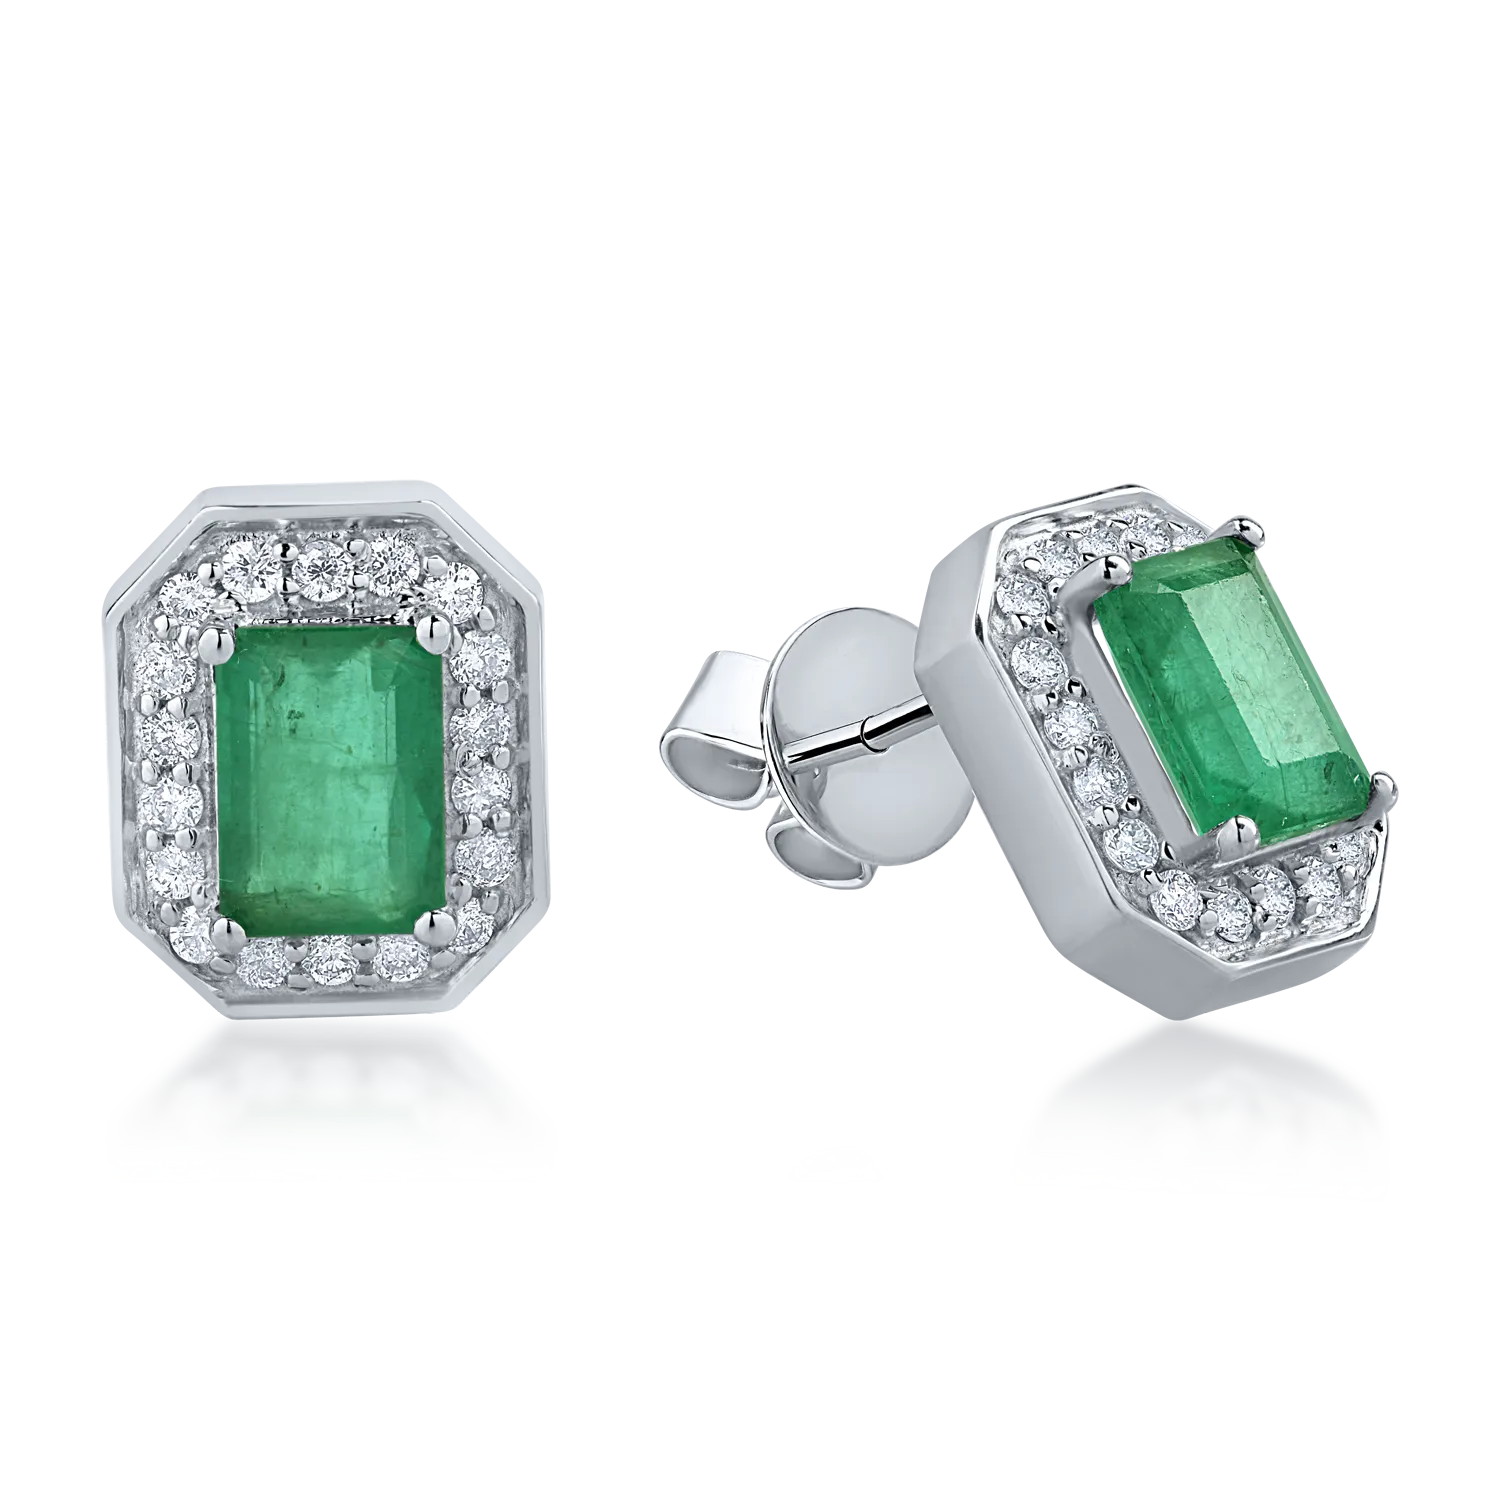 White gold earrings with 1.91ct emeralds and 0.39ct diamonds